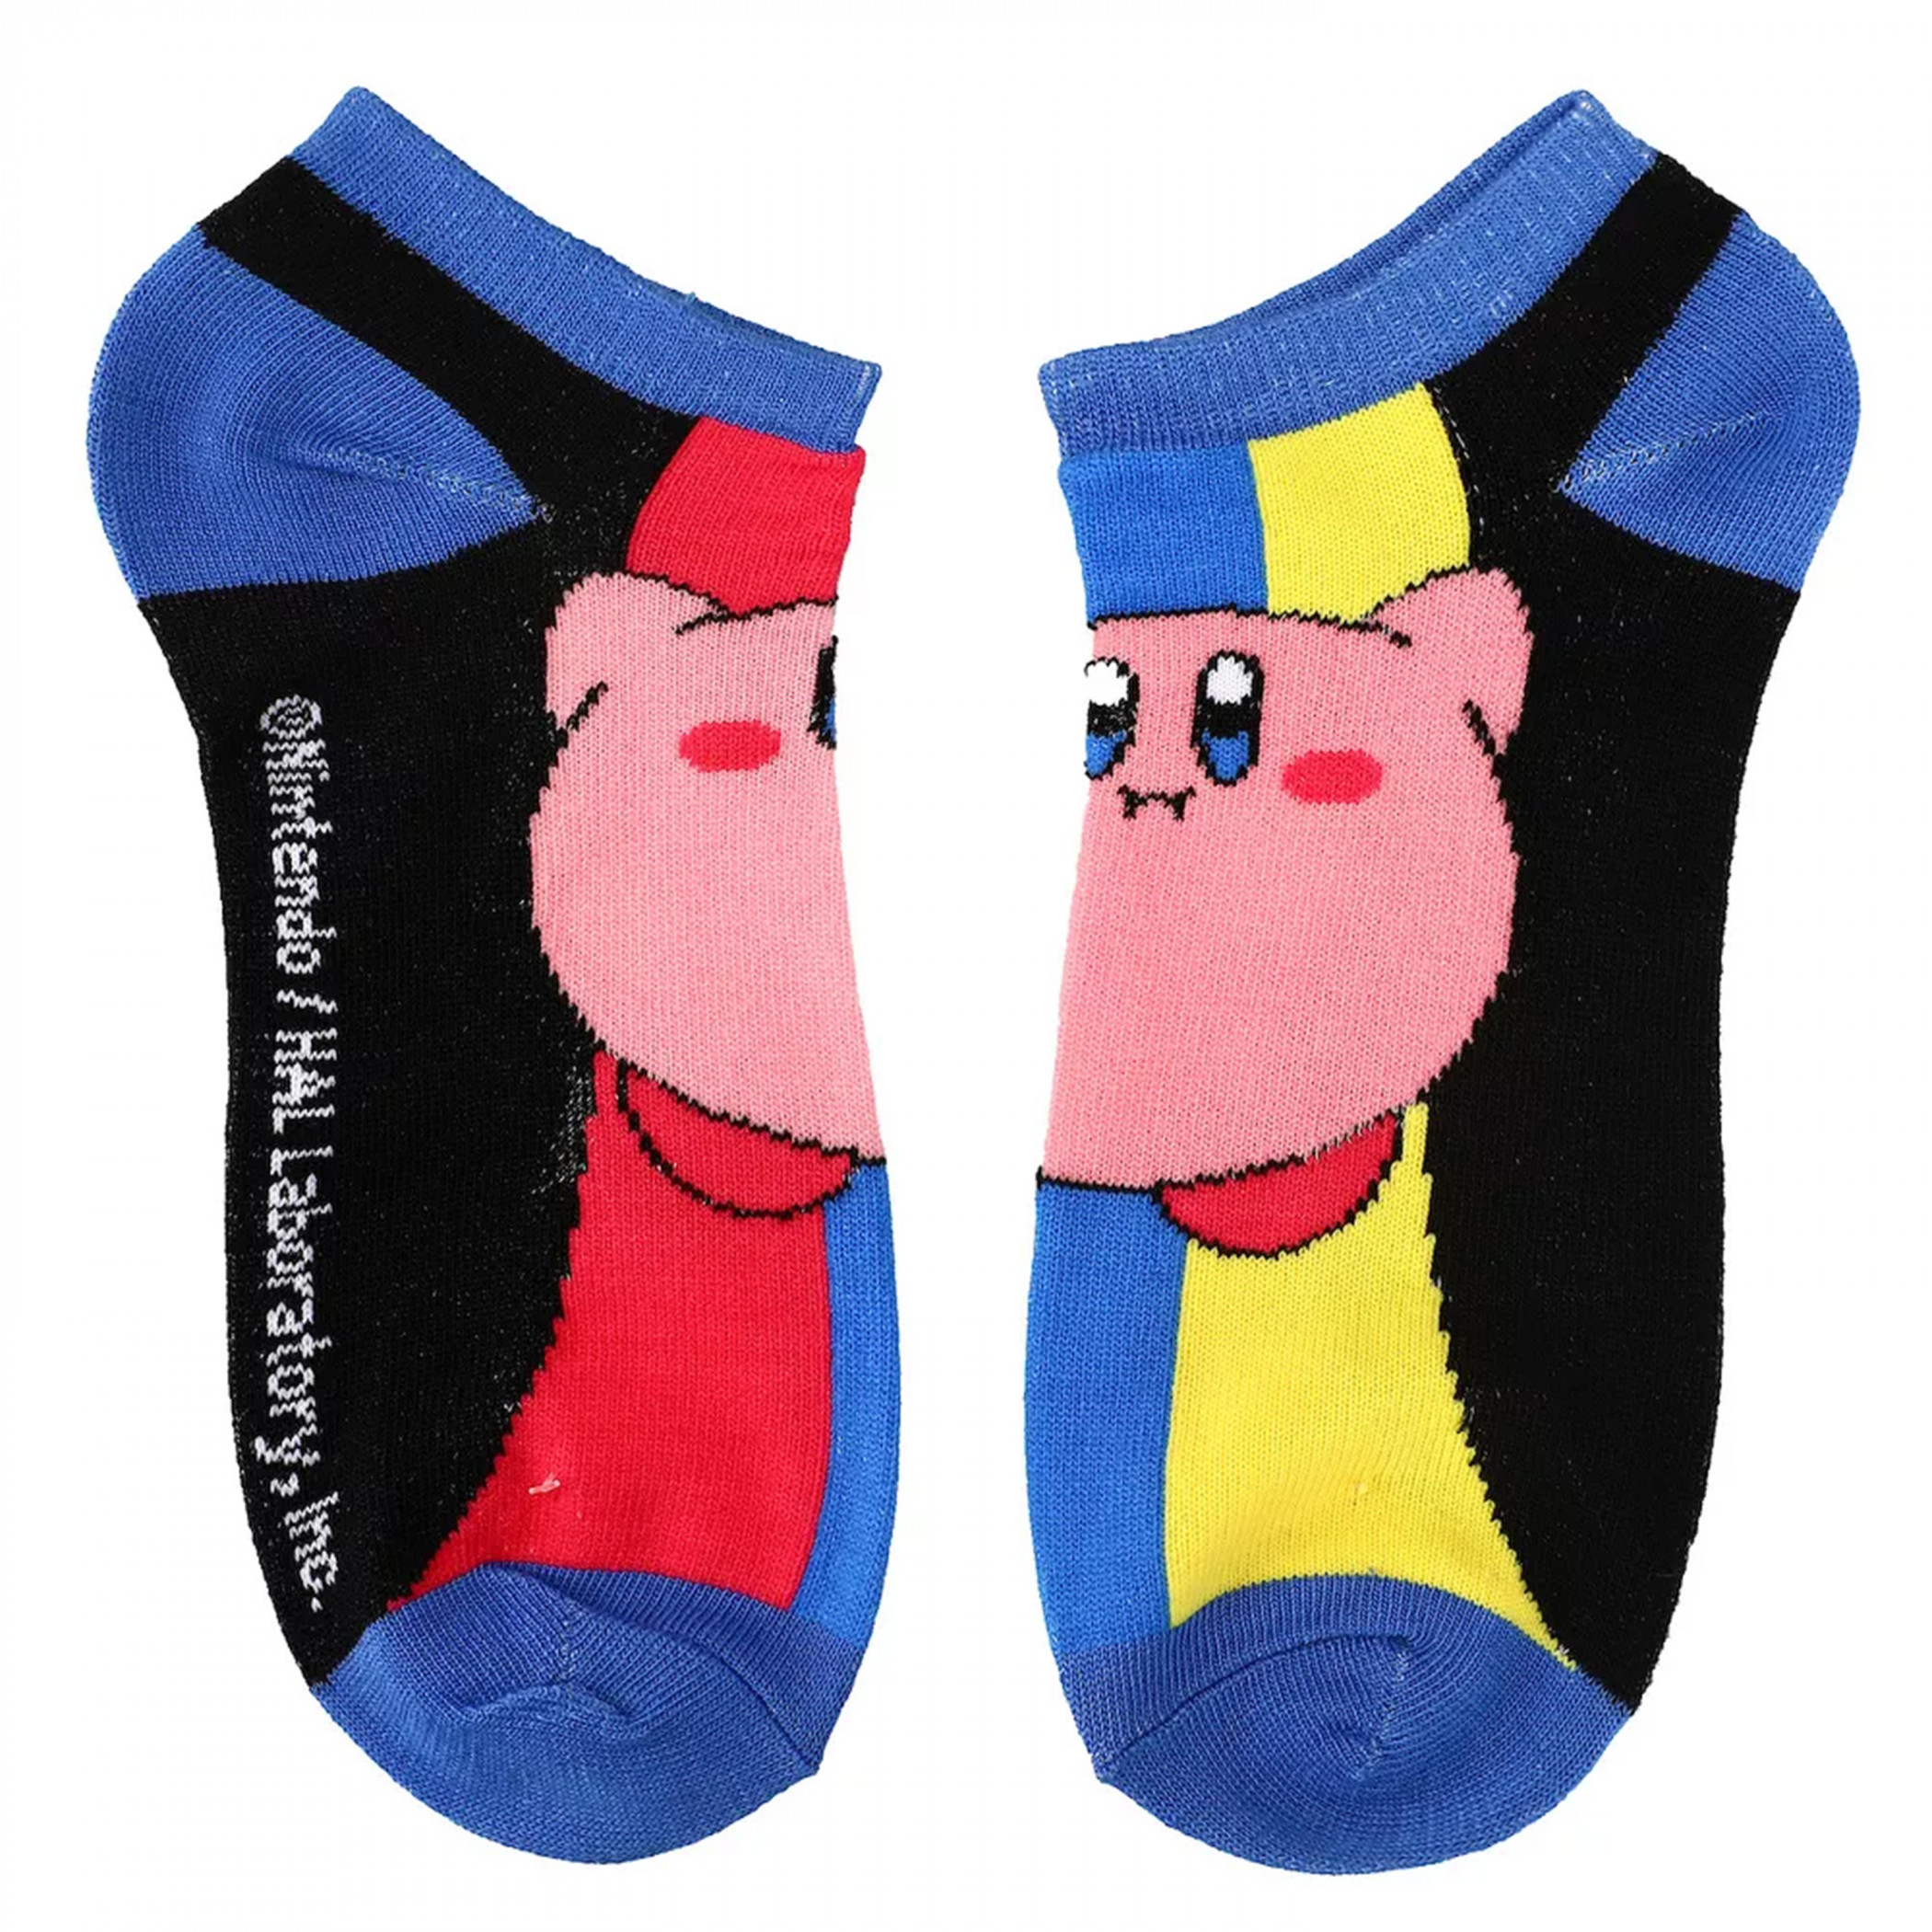 Kirby Jack of All Trades 5-Pair Pack of Ankle Socks